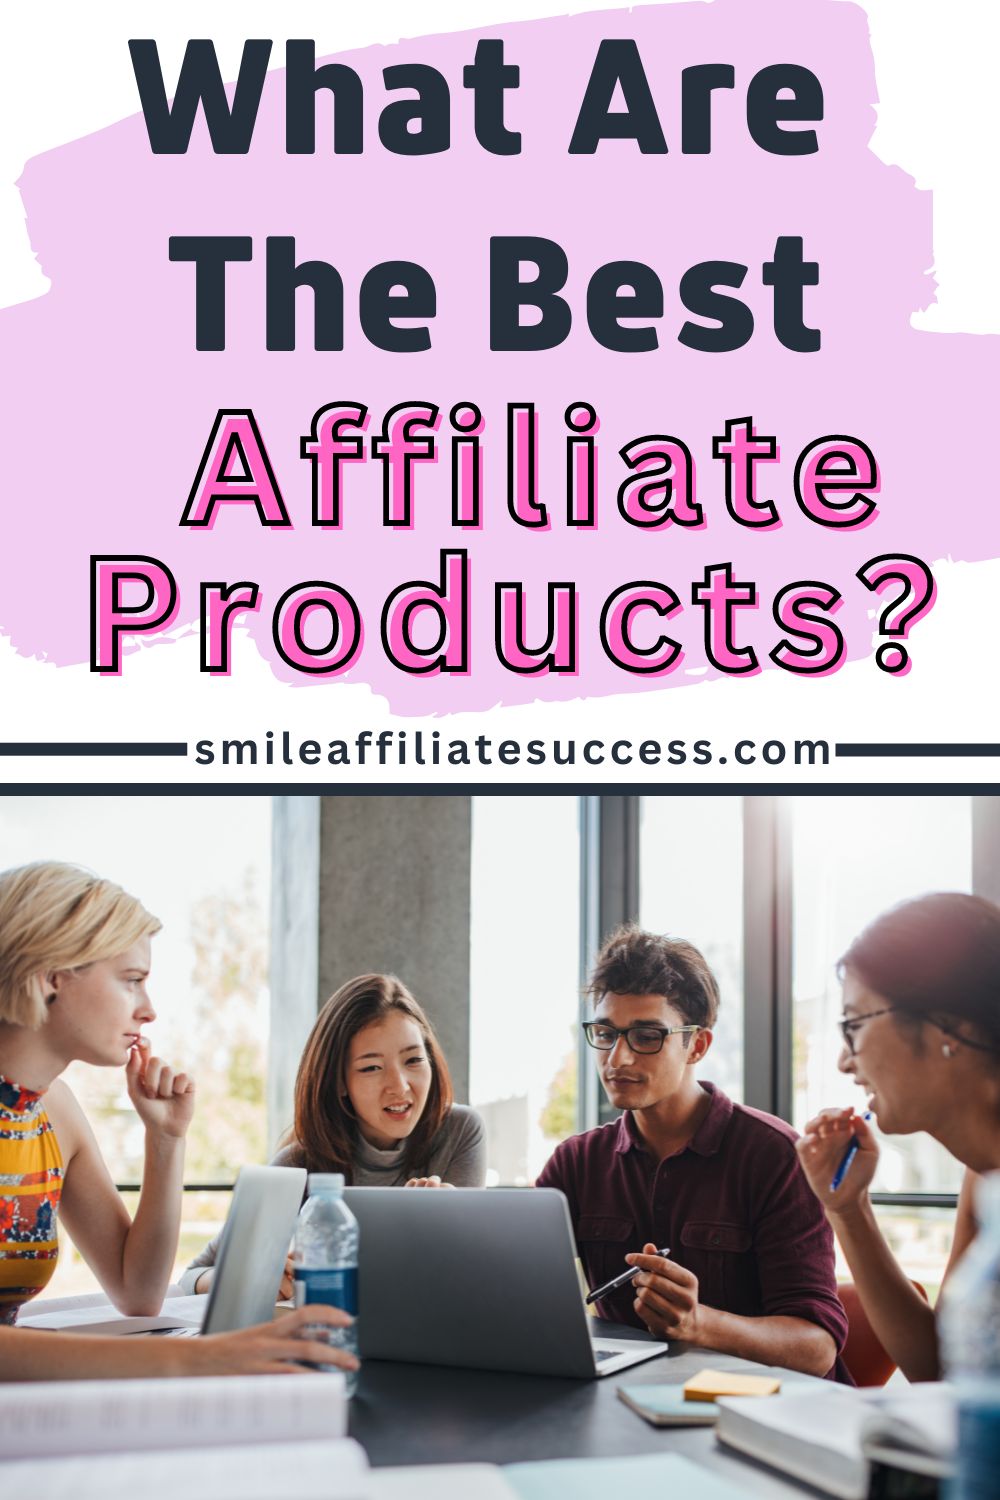 What Are The Best Affiliate Products To Sell?